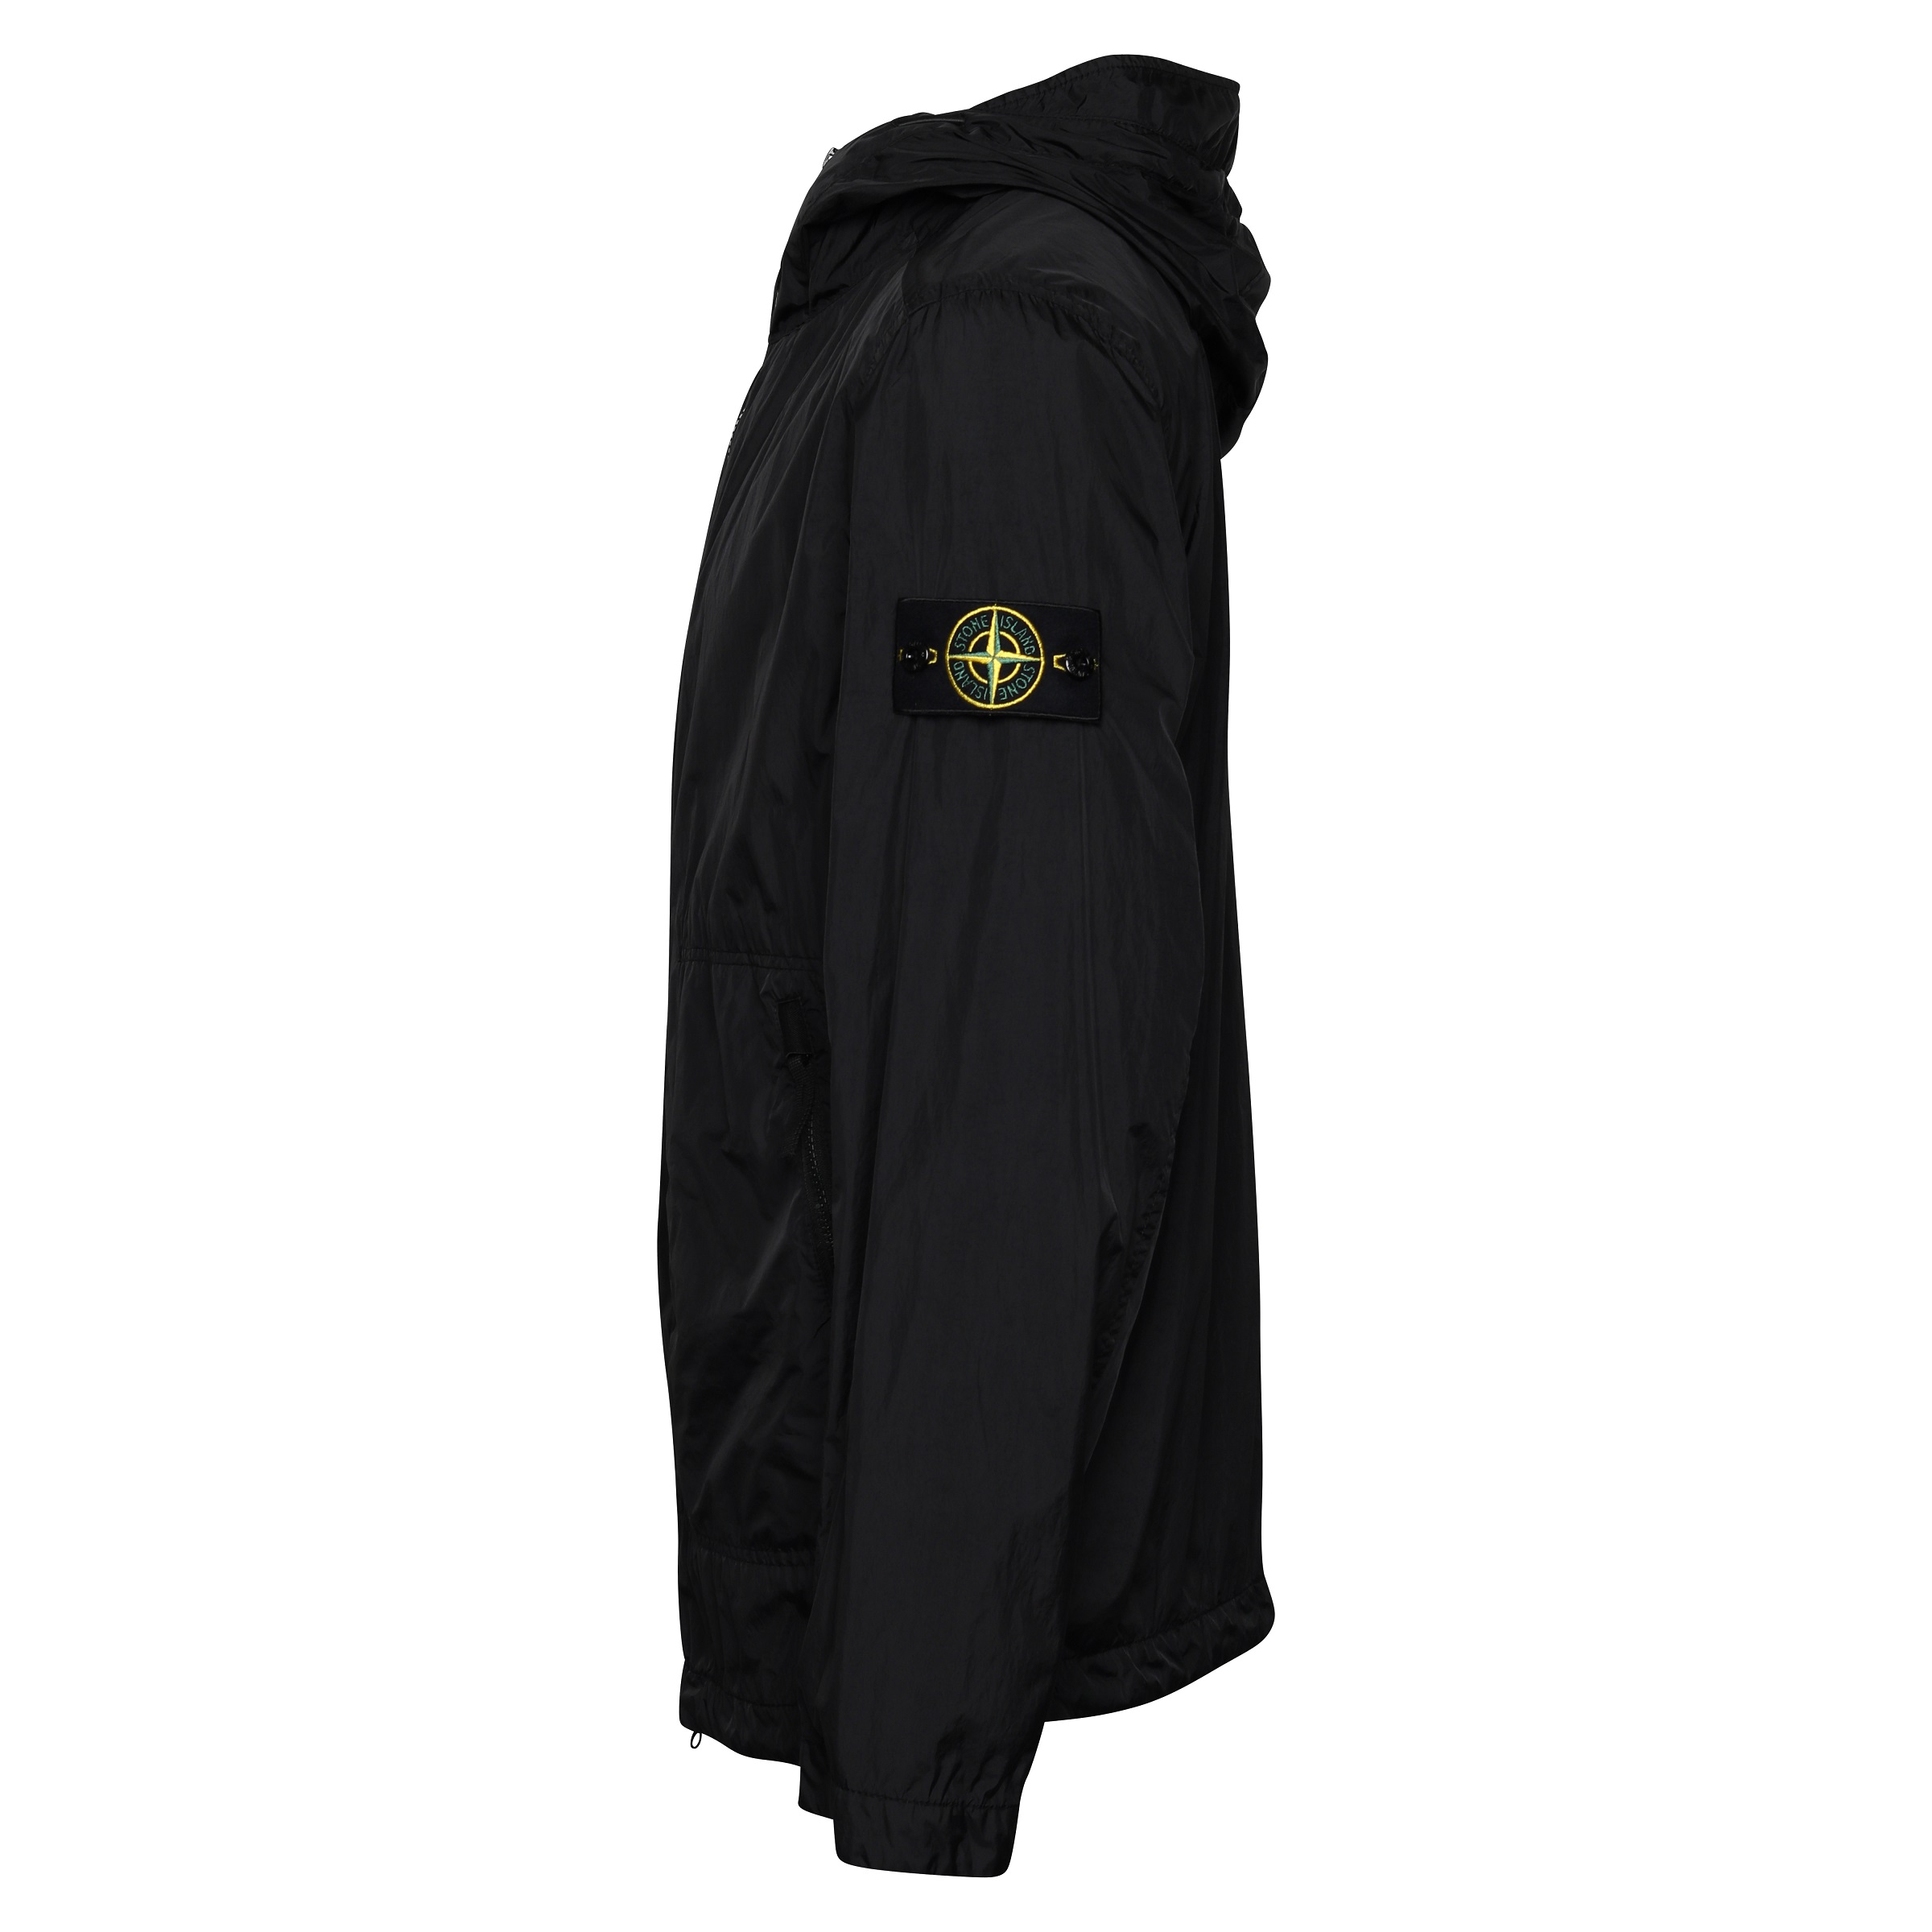 Stone Island Garment Dyed Crinkle Reps Hooded Light Jacket in Black 2XL